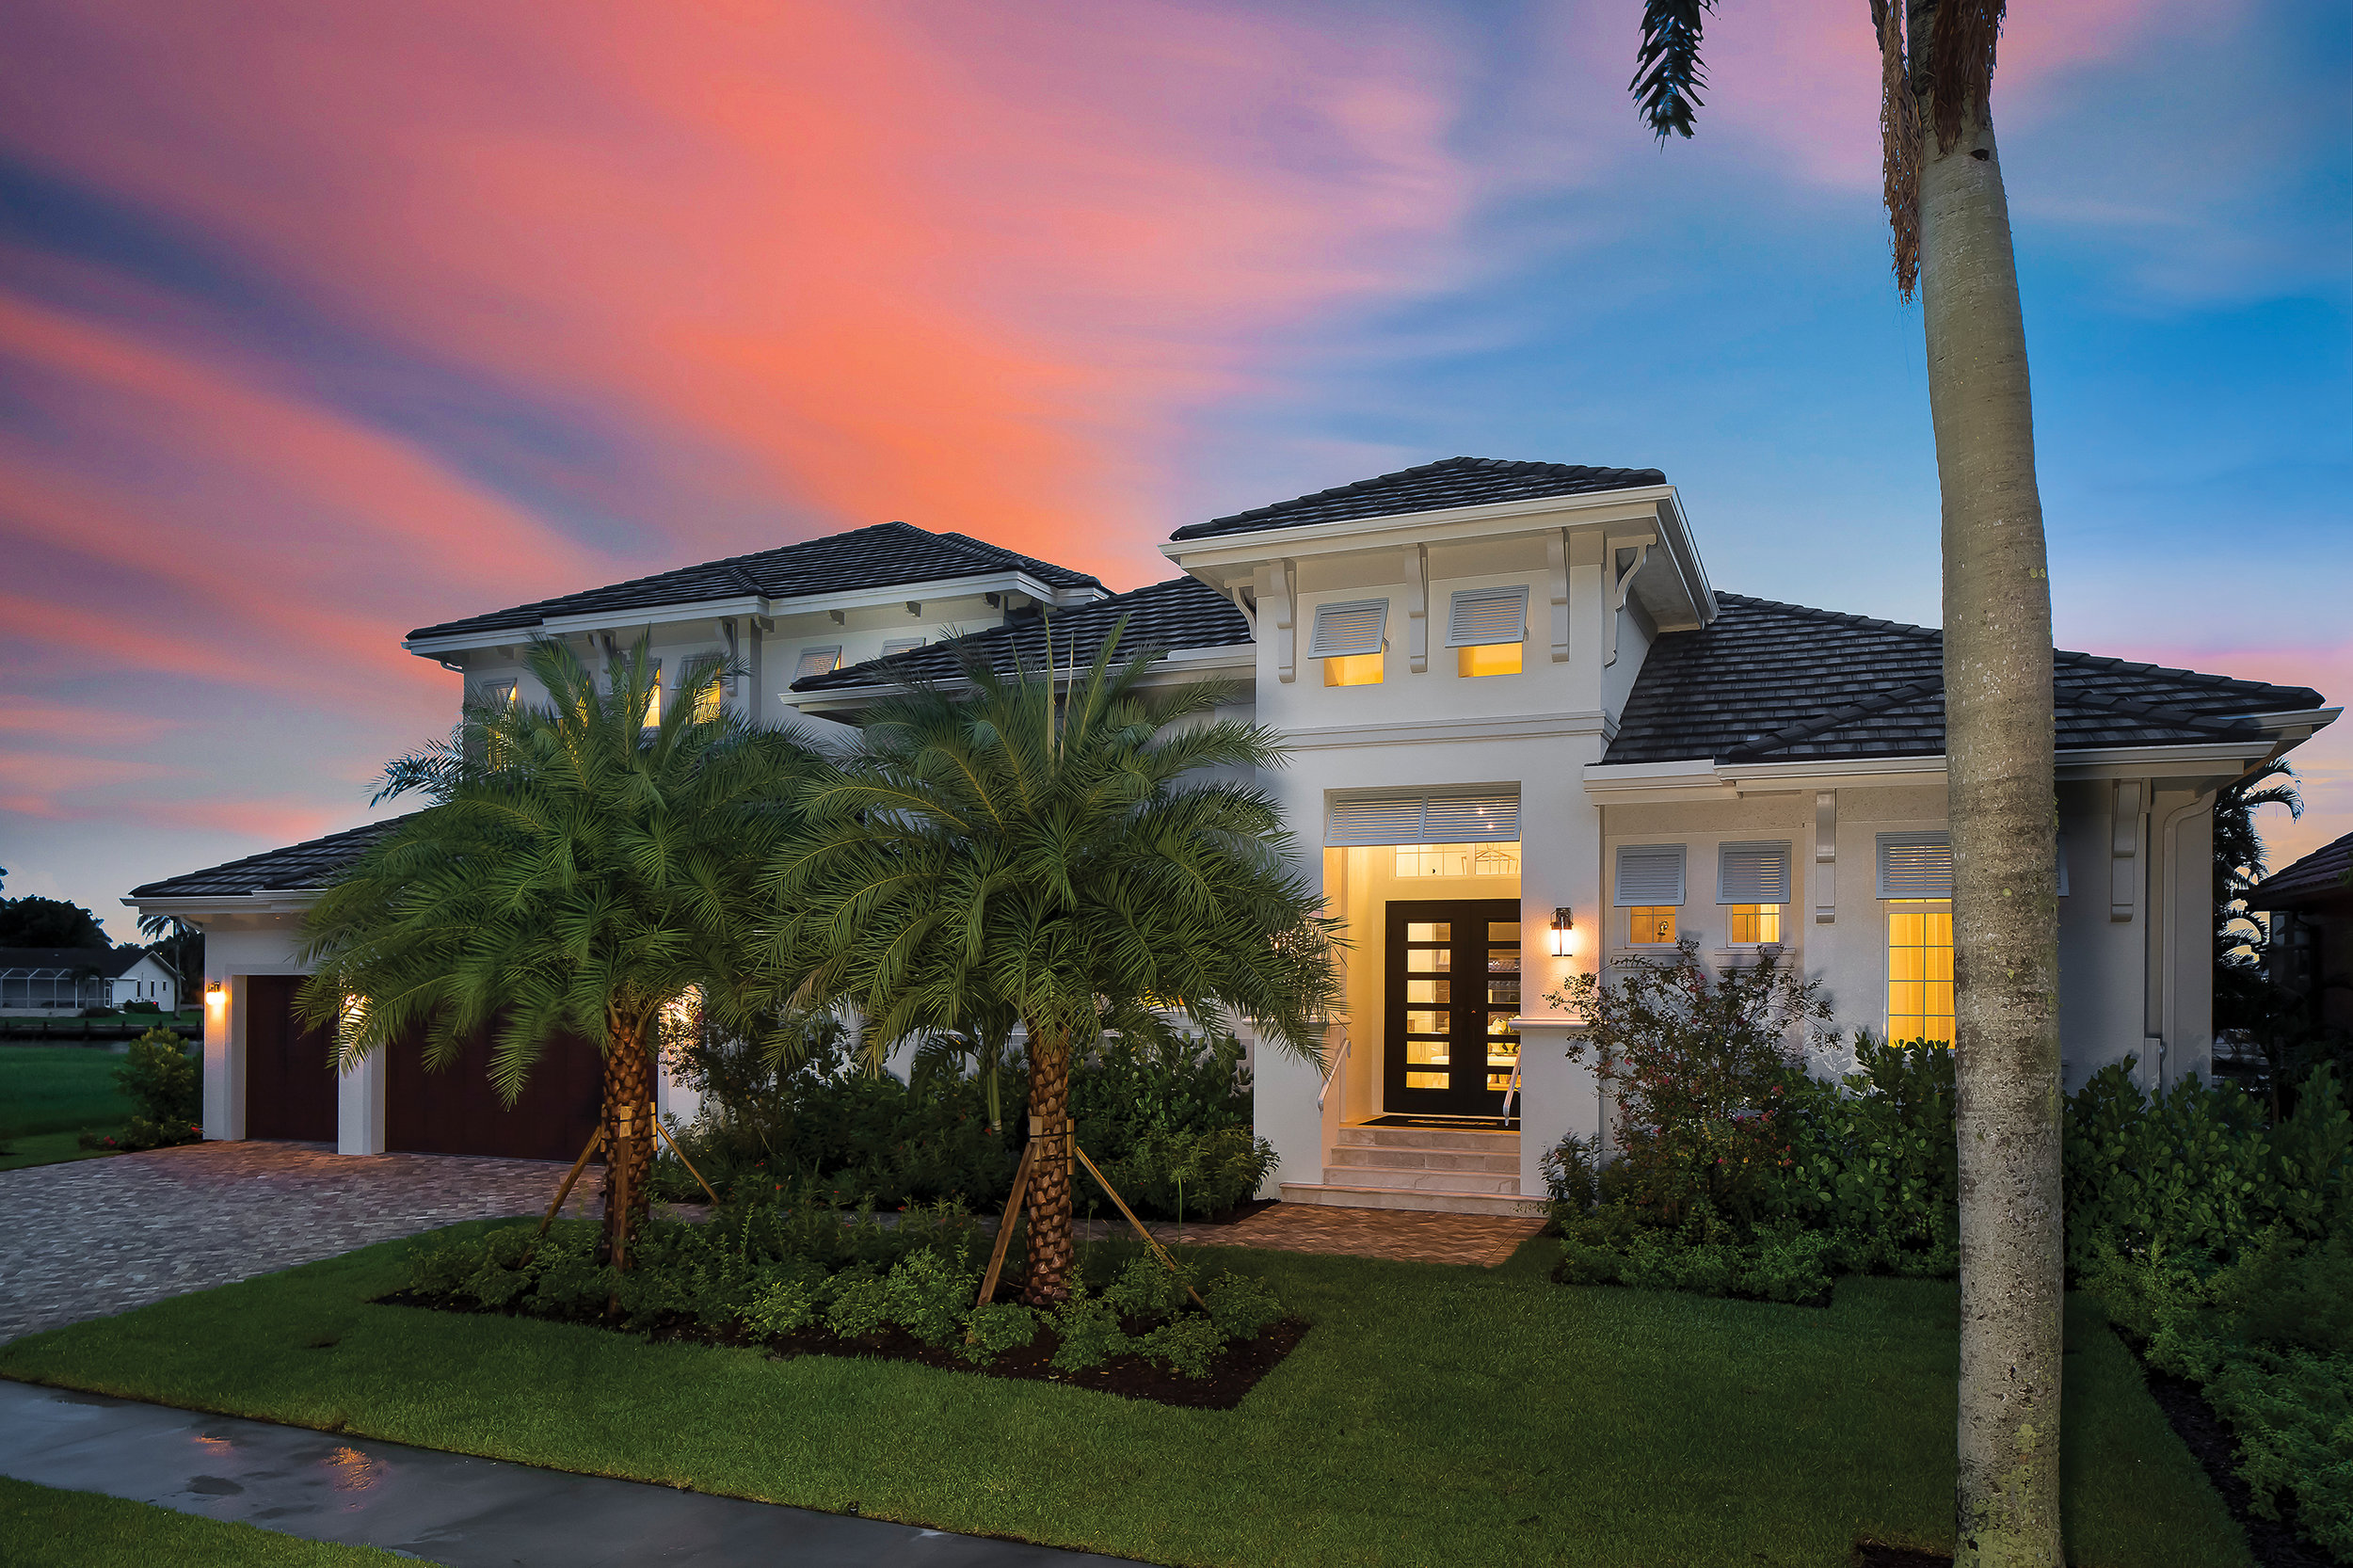  The home’s inviting exterior, created by Southwest Florida Design, is a beautiful blend of West Indies style and classic Florida charm. The home is balanced but not symmetrical, creating a more casual appeal perfect for its island location. Accents 